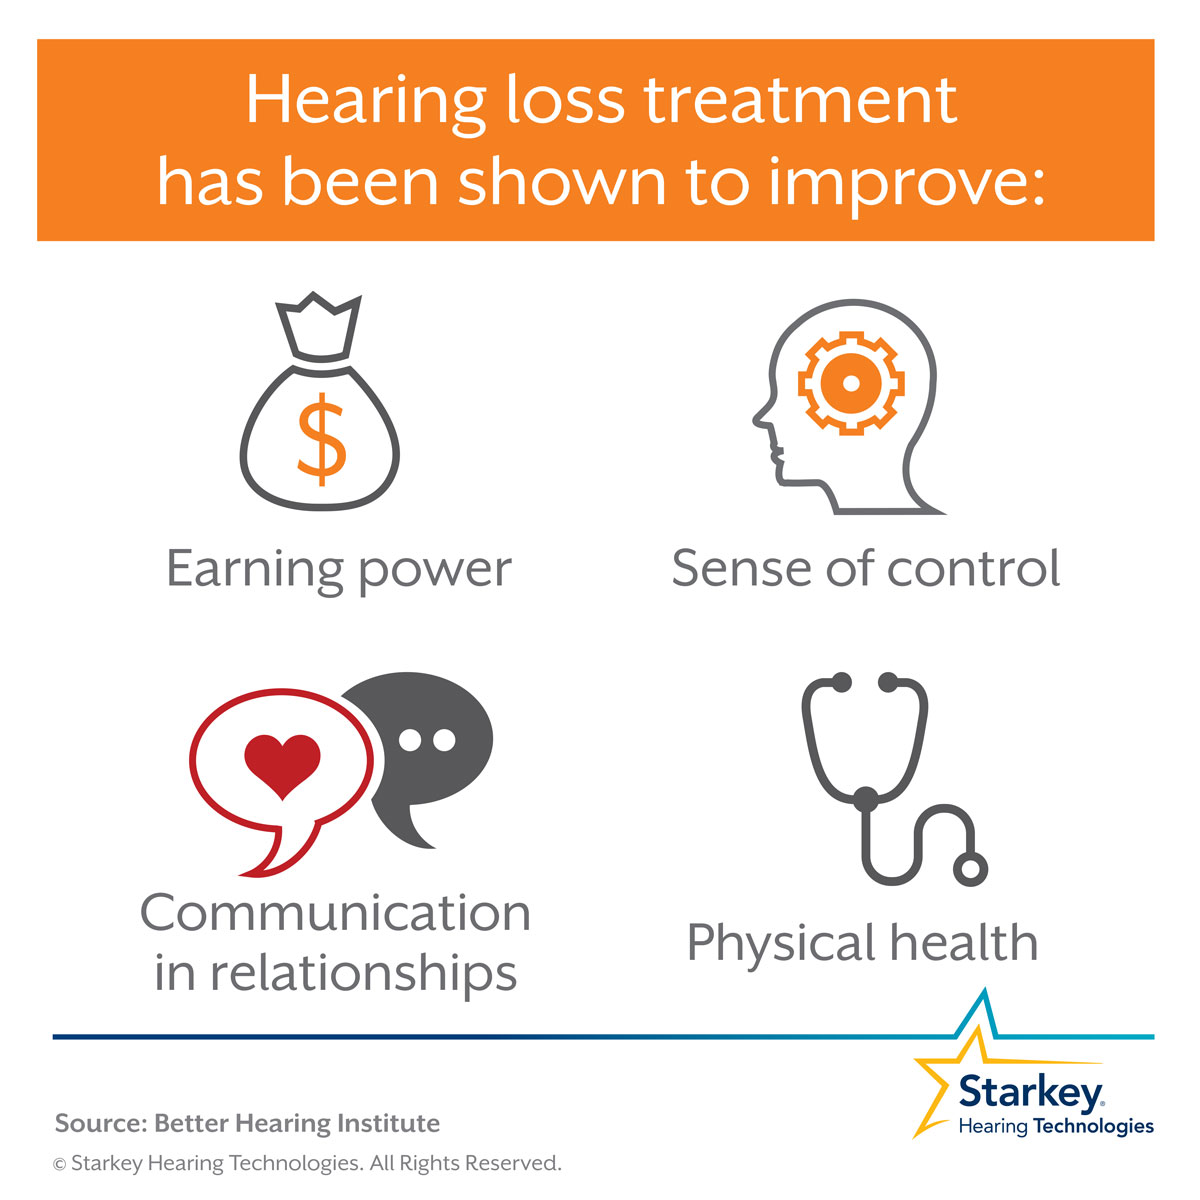 Here are four benefits of treating hearing loss